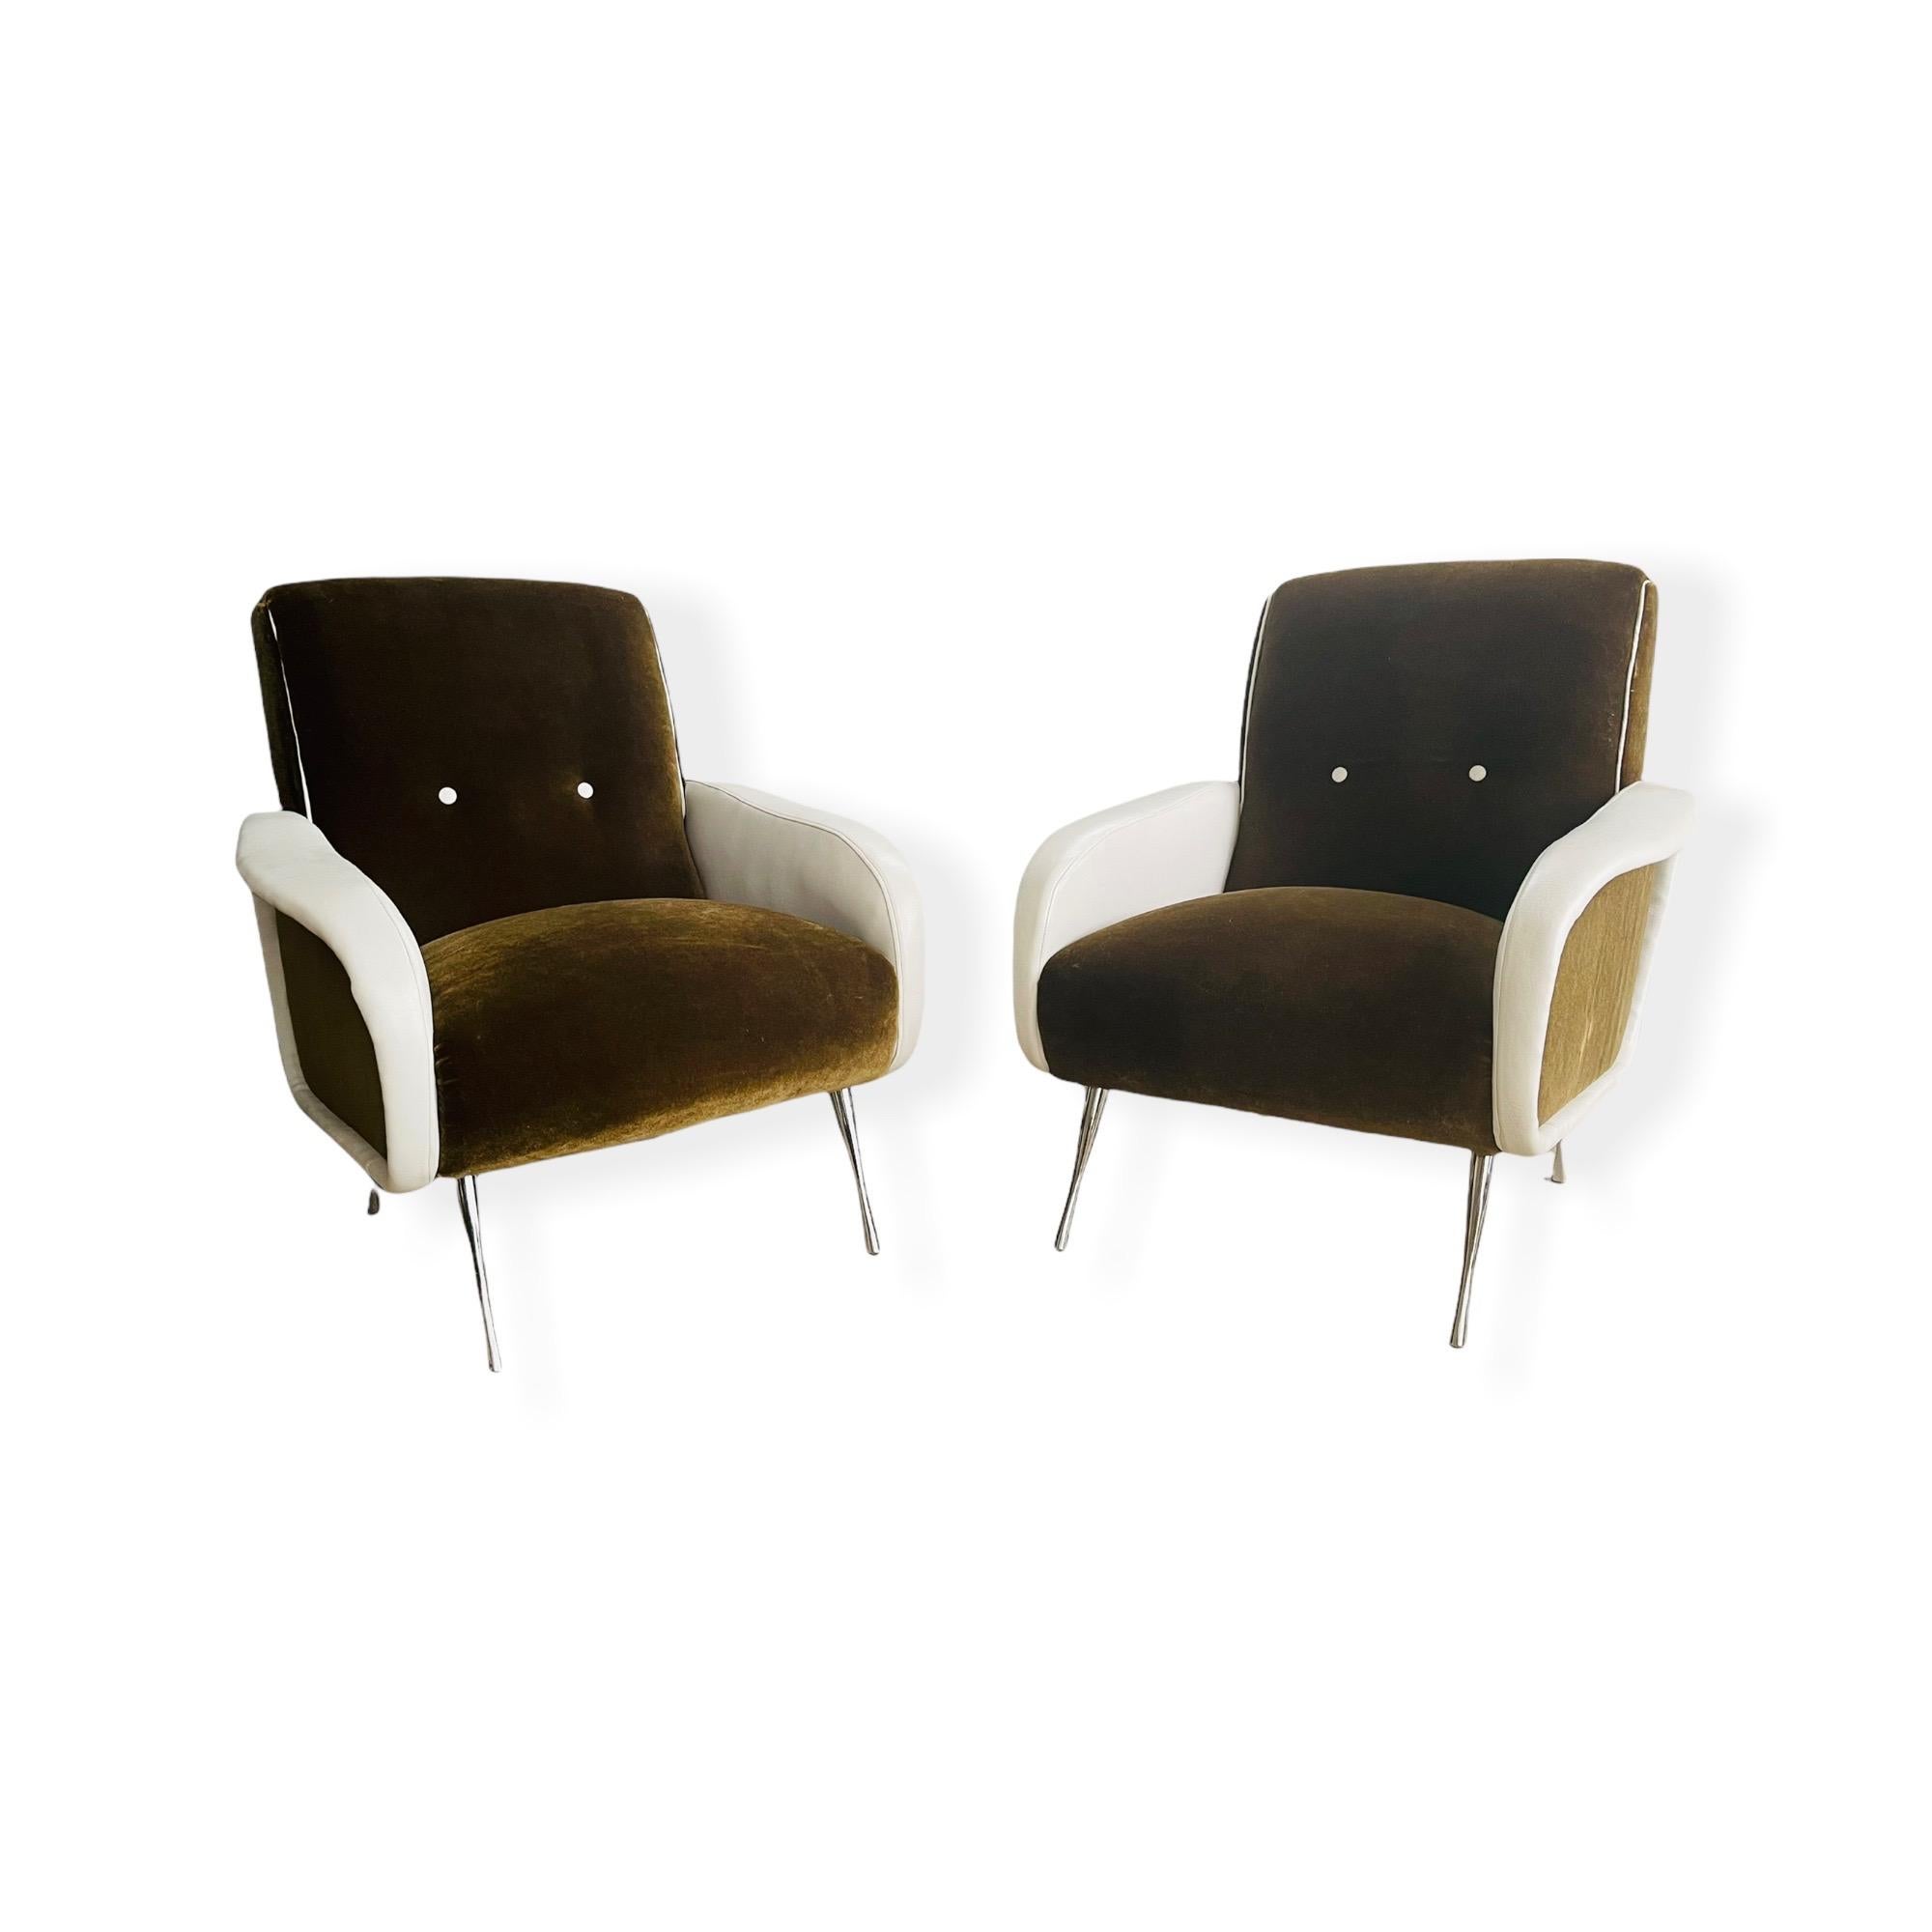 A beautiful pair of vintage Italian modern lounge chairs in style of Marco Zanuso. These comfy chairs have have beautiful tapered chrome legs with olive/brown upholstery and white vinyl arms. The chairs are in good vintage condition with normal wear